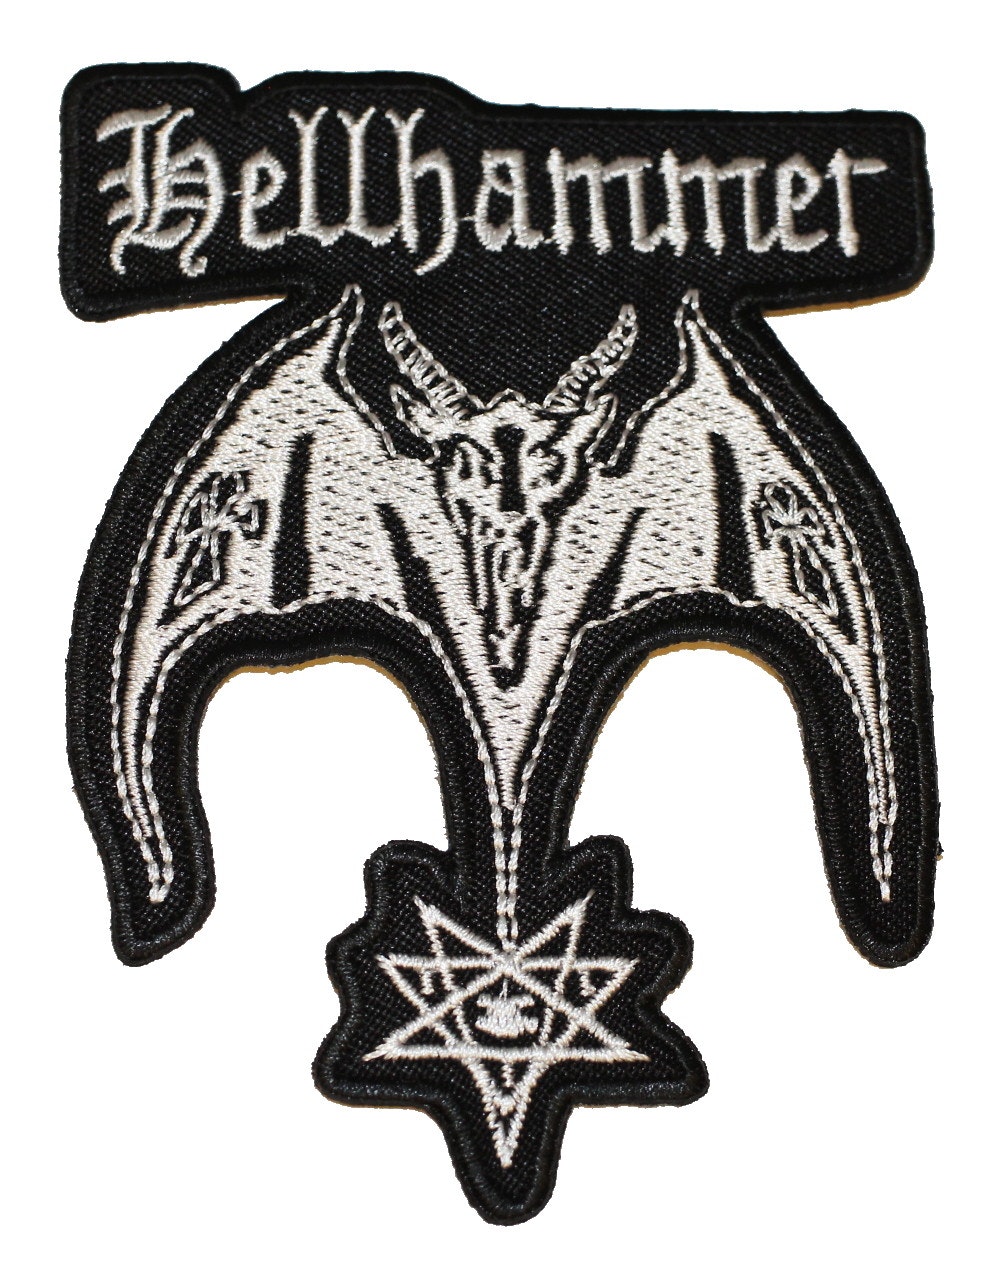 Hellhammer logo patch